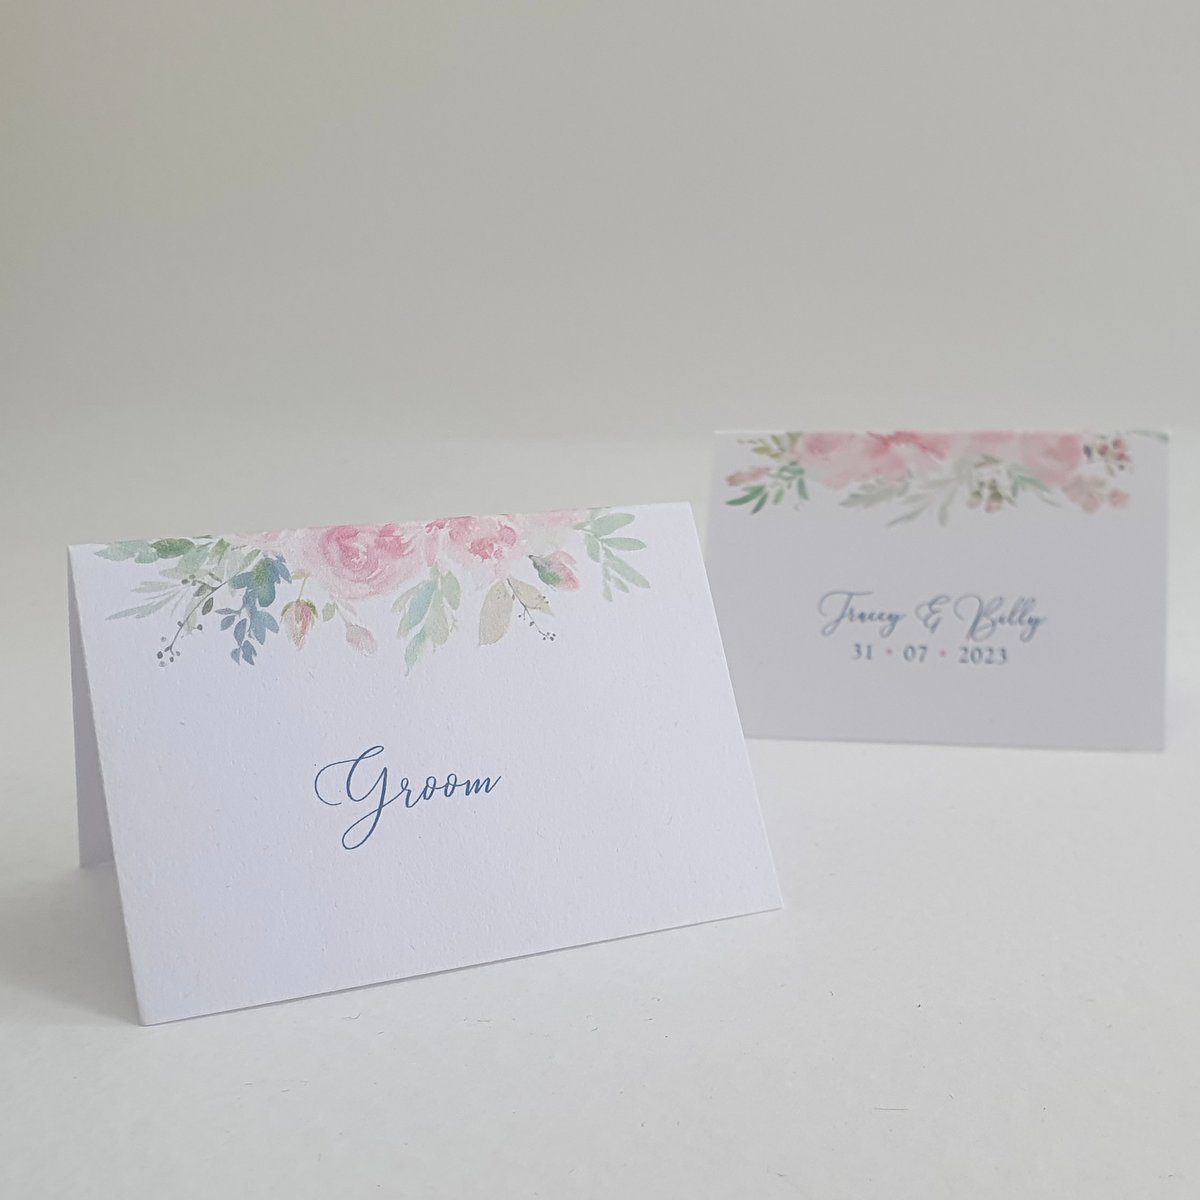 wedding place name cards, one shows the front with a pink floral design, the other shows the back with the bride and grooms names and wedding date